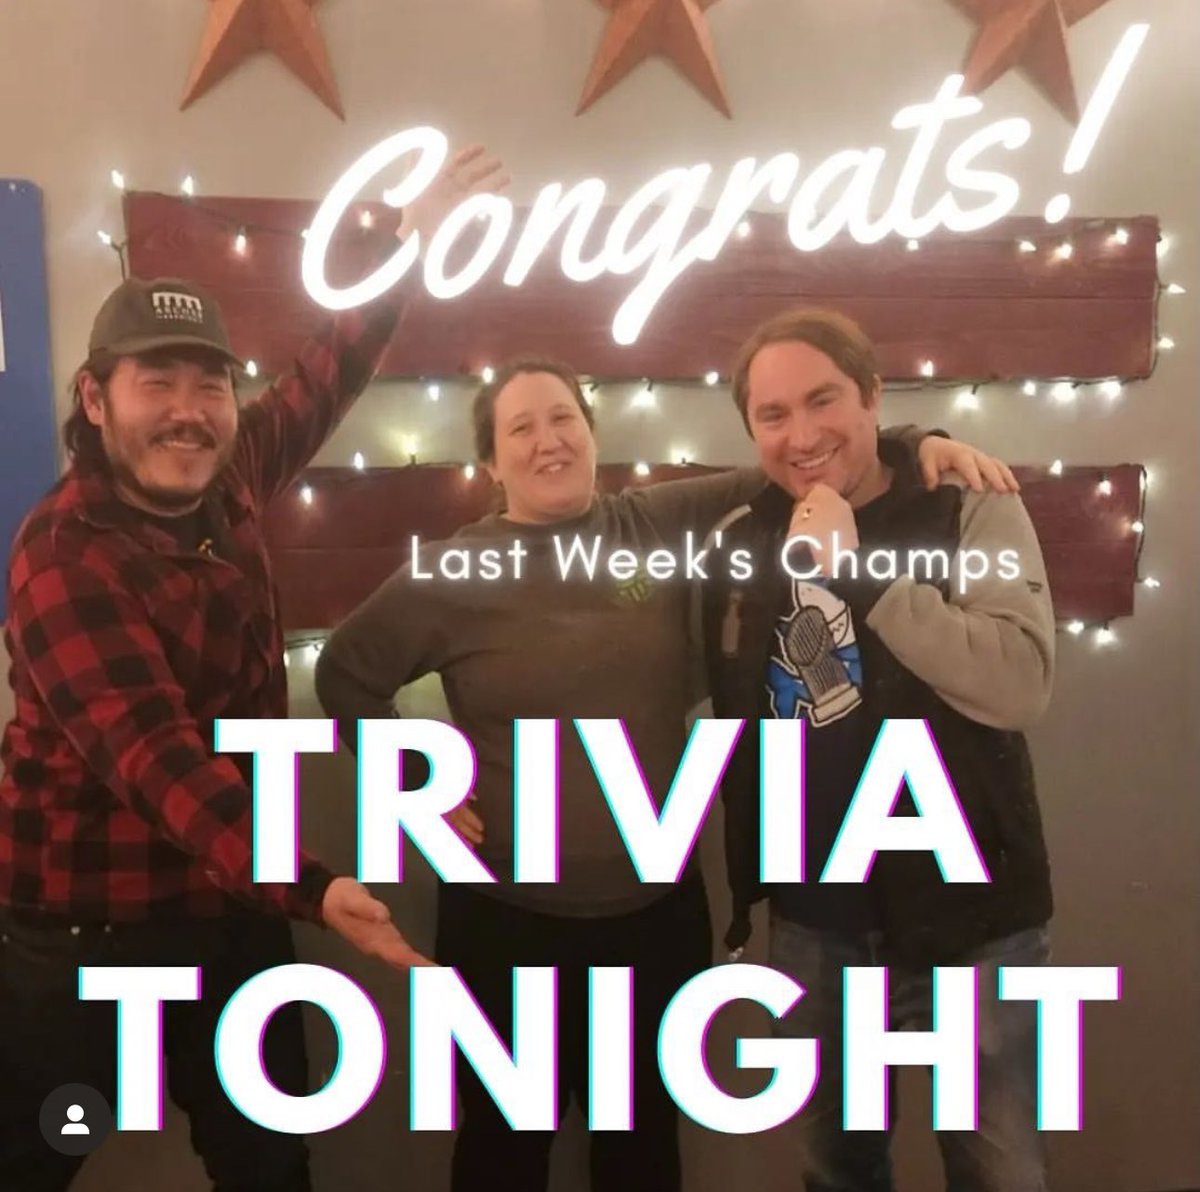 Seriously Trivia tonight at 7pm. Food by Dine with Claudine. Don’t forget, we have pitcher specials for your trivia team. 🤓🍻